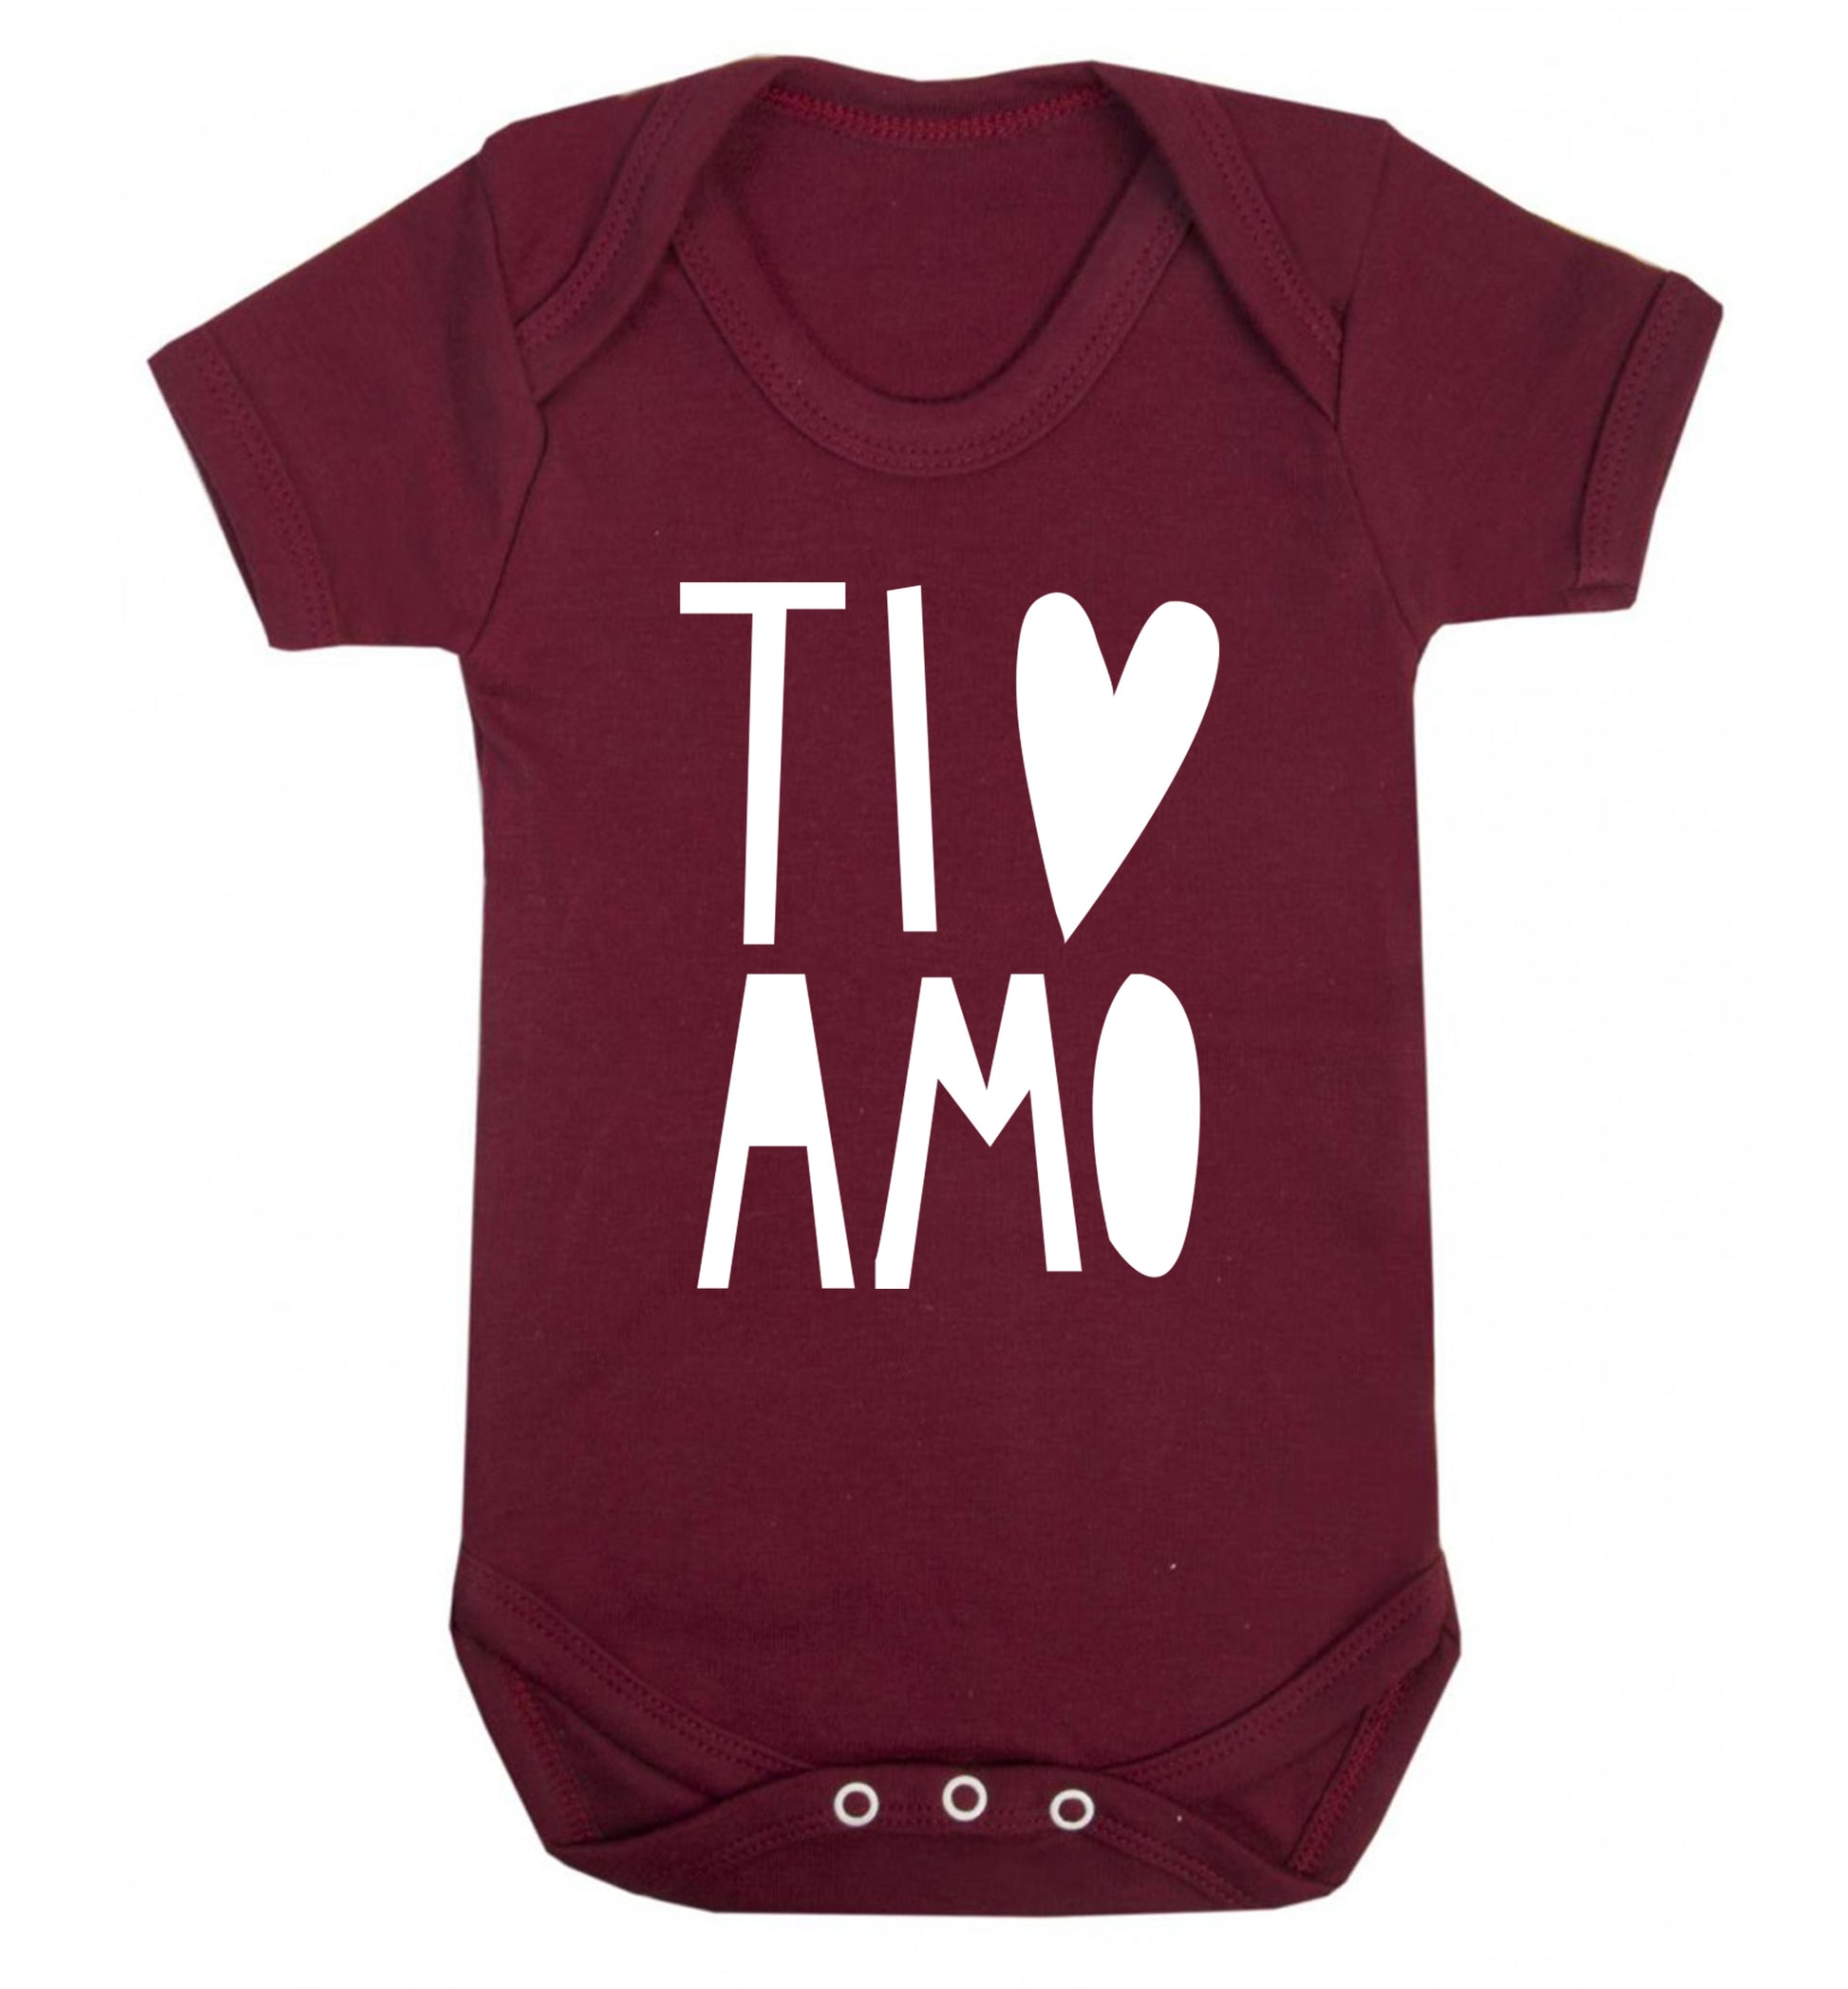 Ti amo - I love you Baby Vest maroon 18-24 months